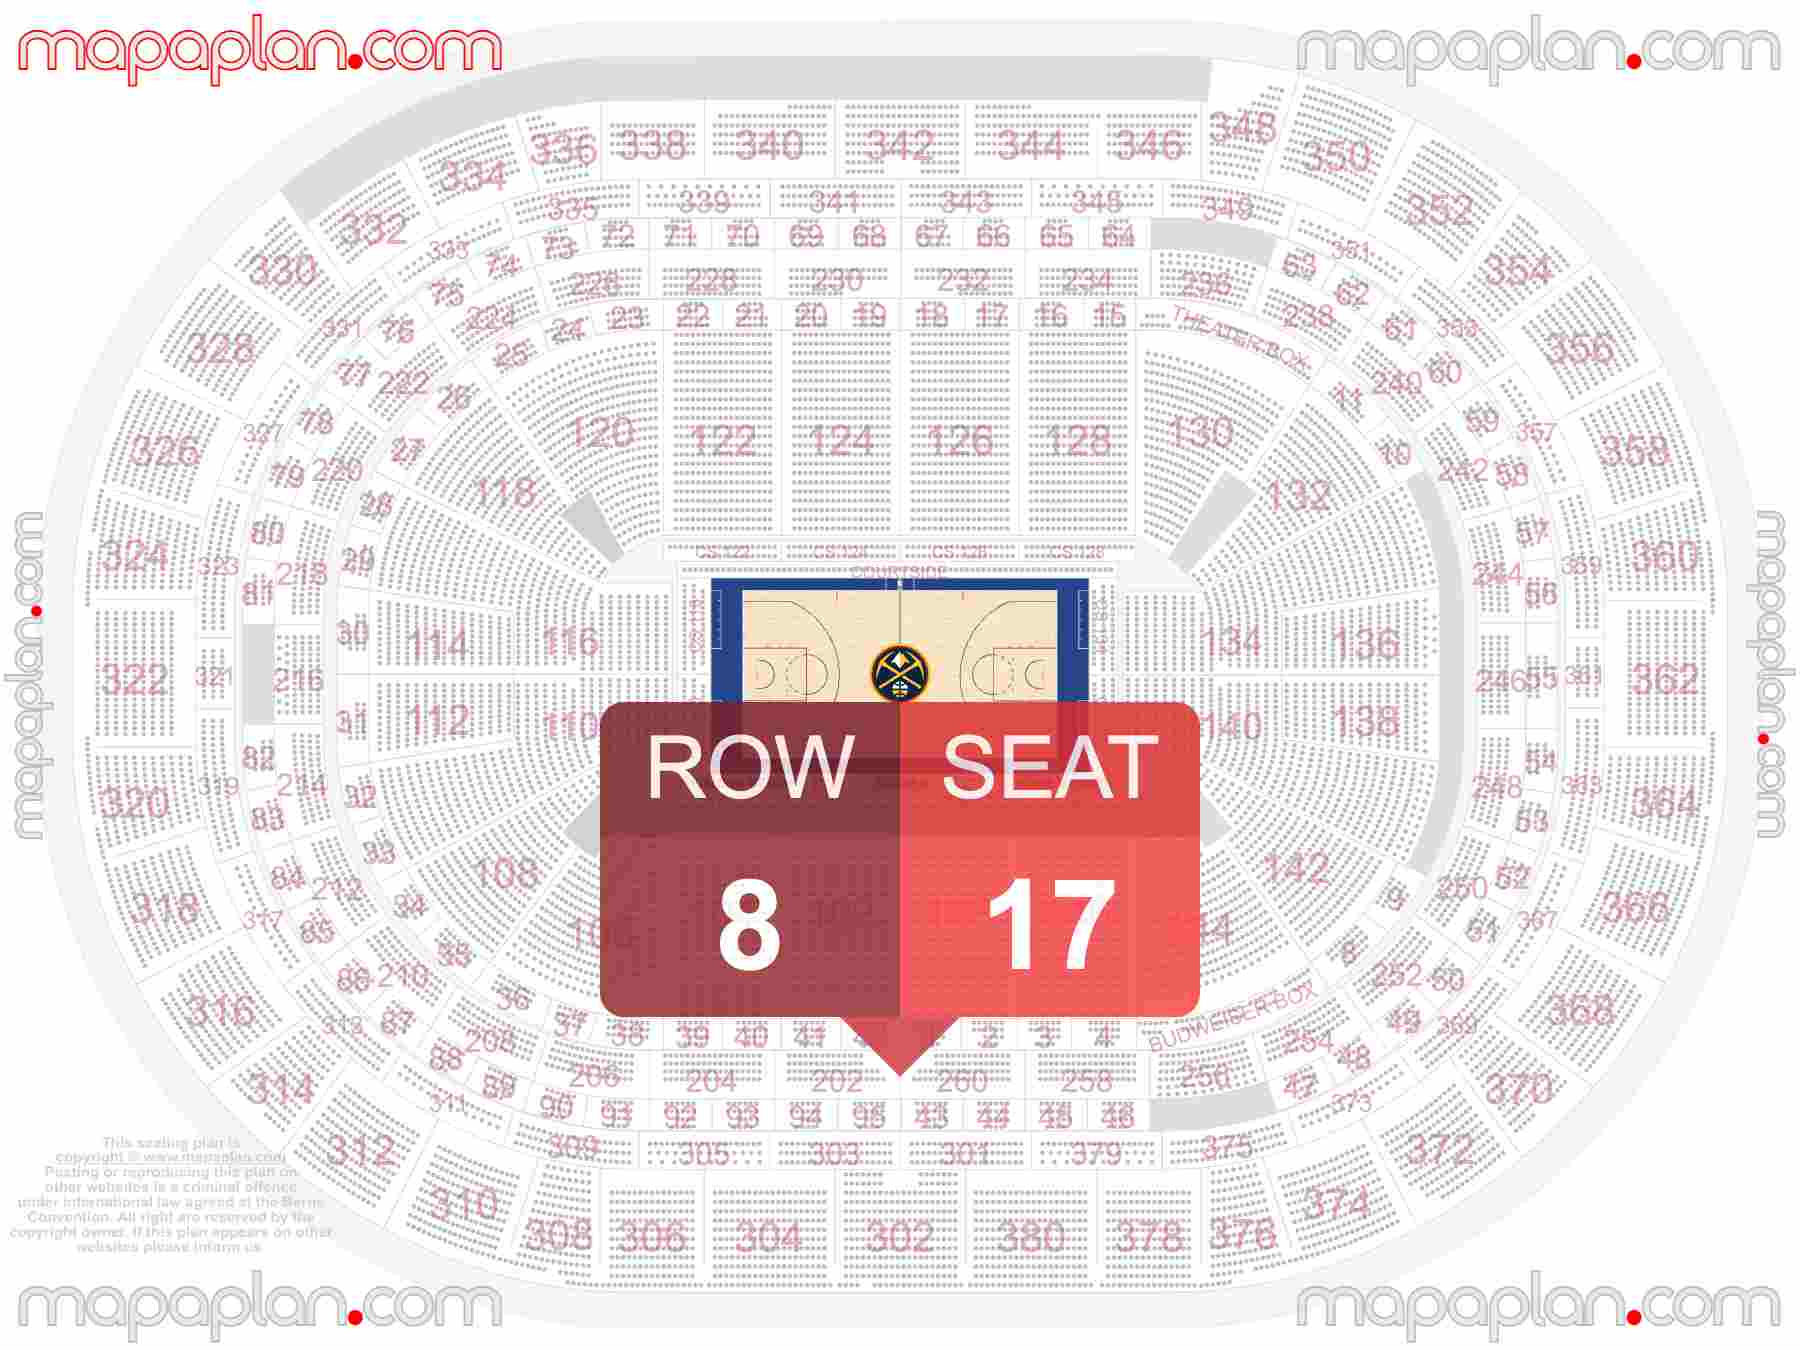 Denver Ball Arena seating chart Denver Nuggets NBA basketball inside capacity view arrangement plan - Interactive virtual 3d best seats & rows detailed stadium image configuration layout